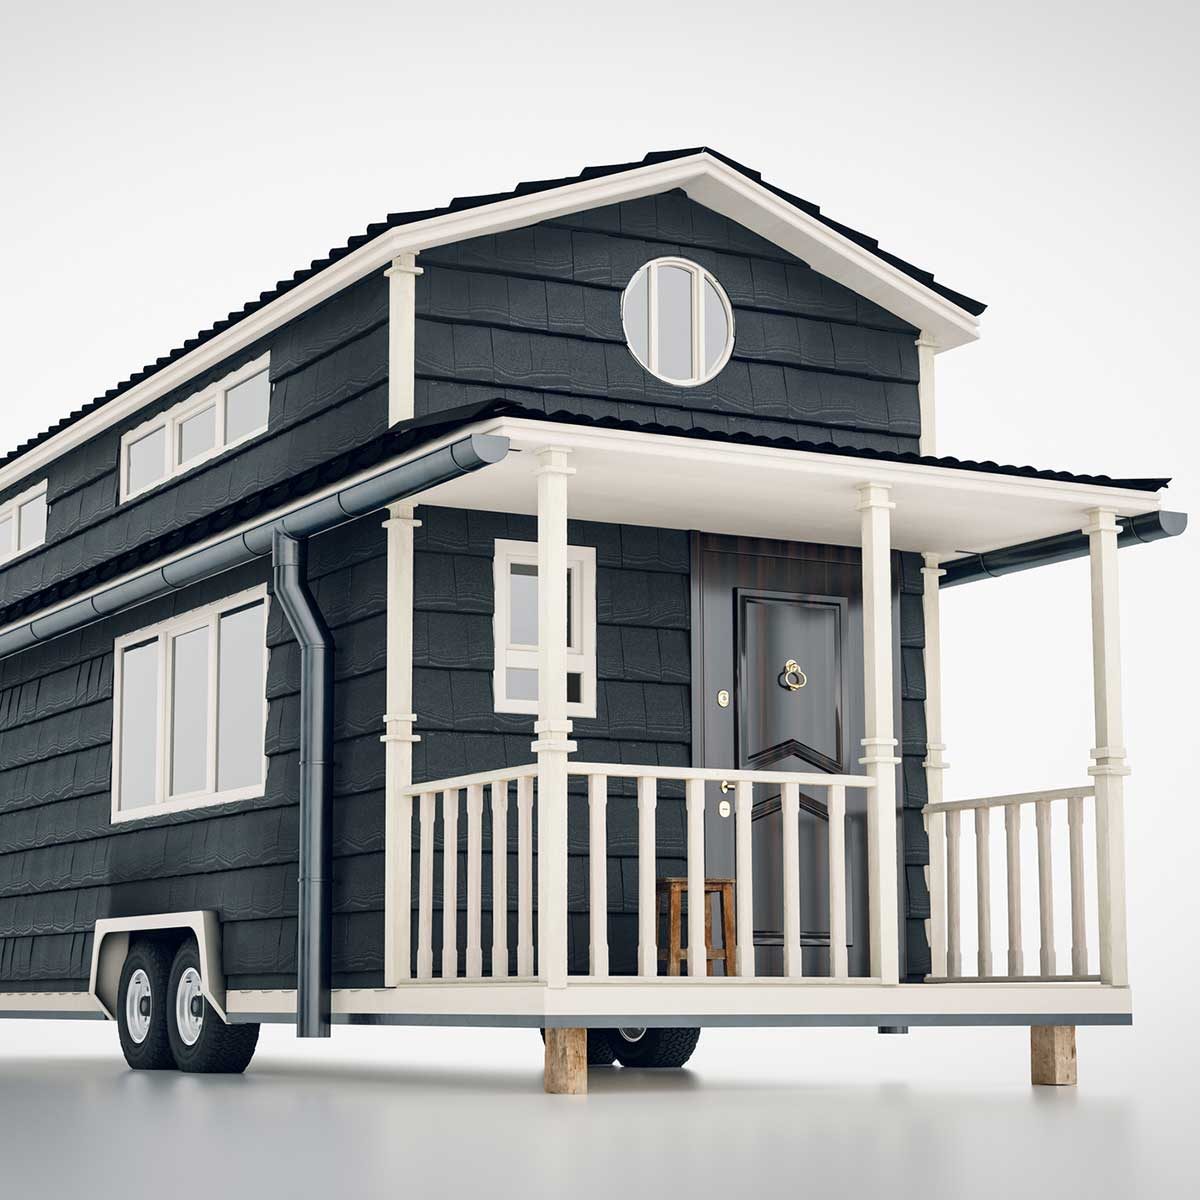 Photos: What Living in a Tiny House Actually Looks Like in Real Life